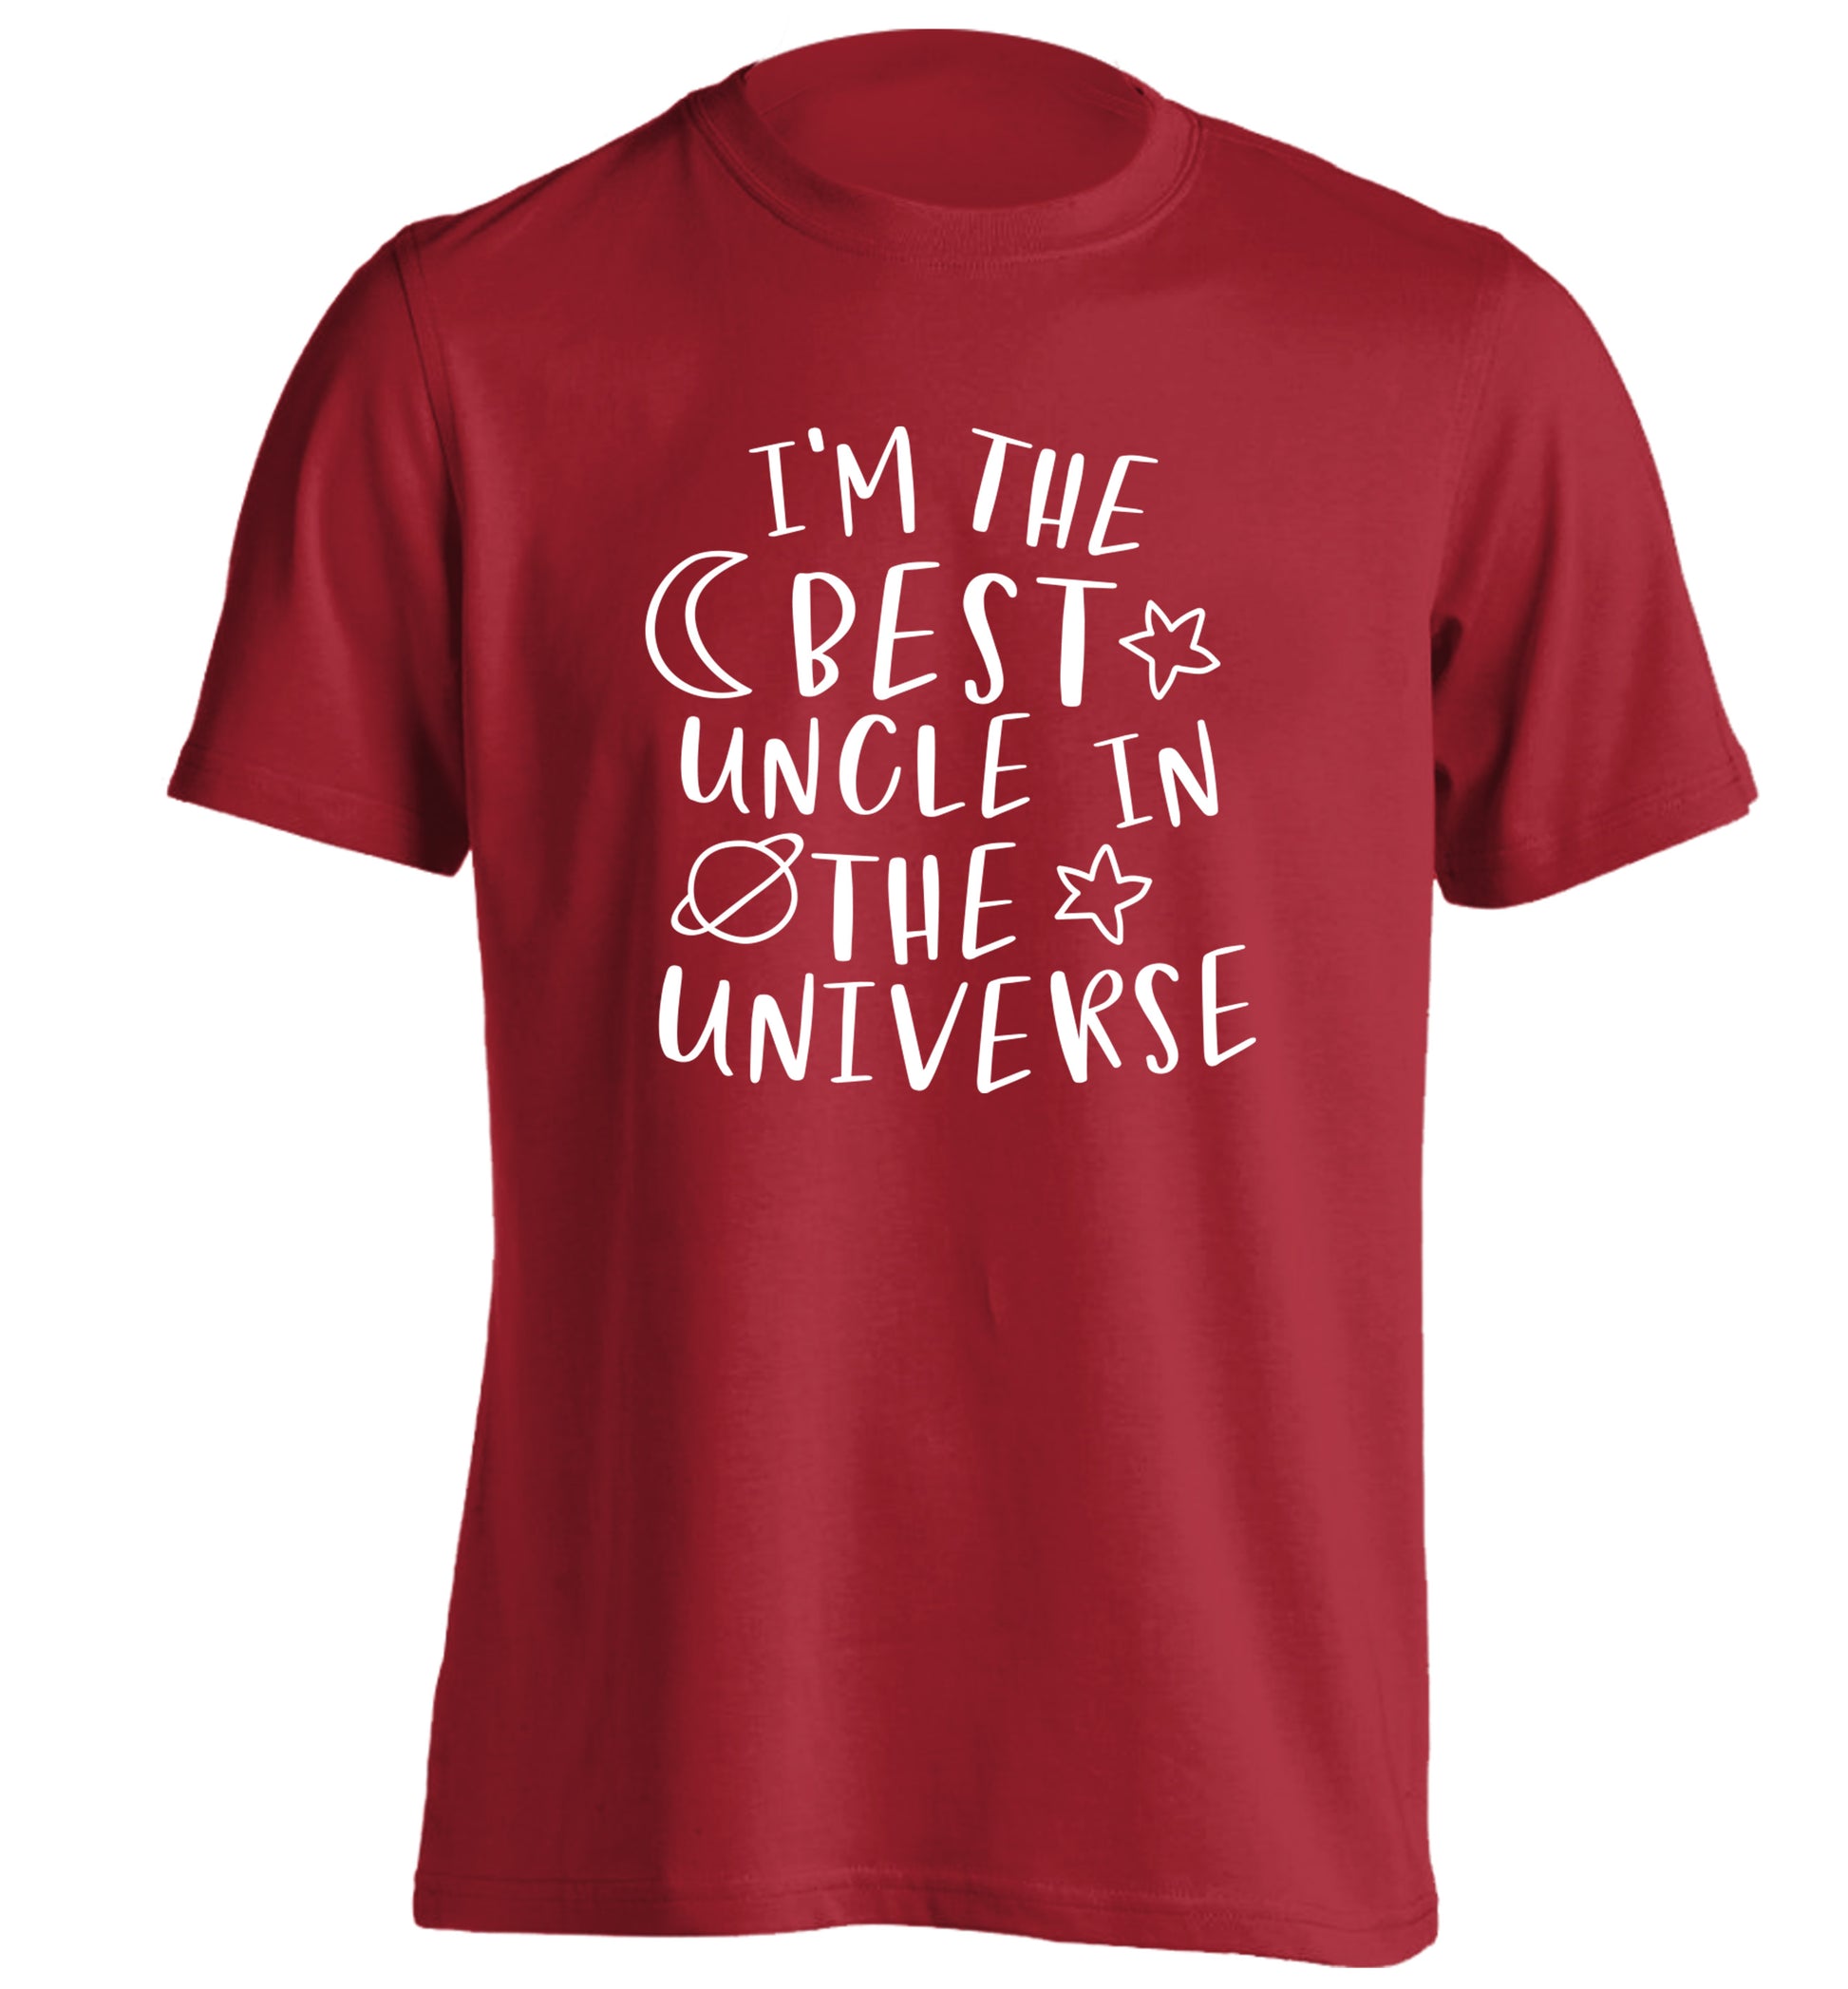 I'm the best uncle in the universe adults unisex red Tshirt 2XL